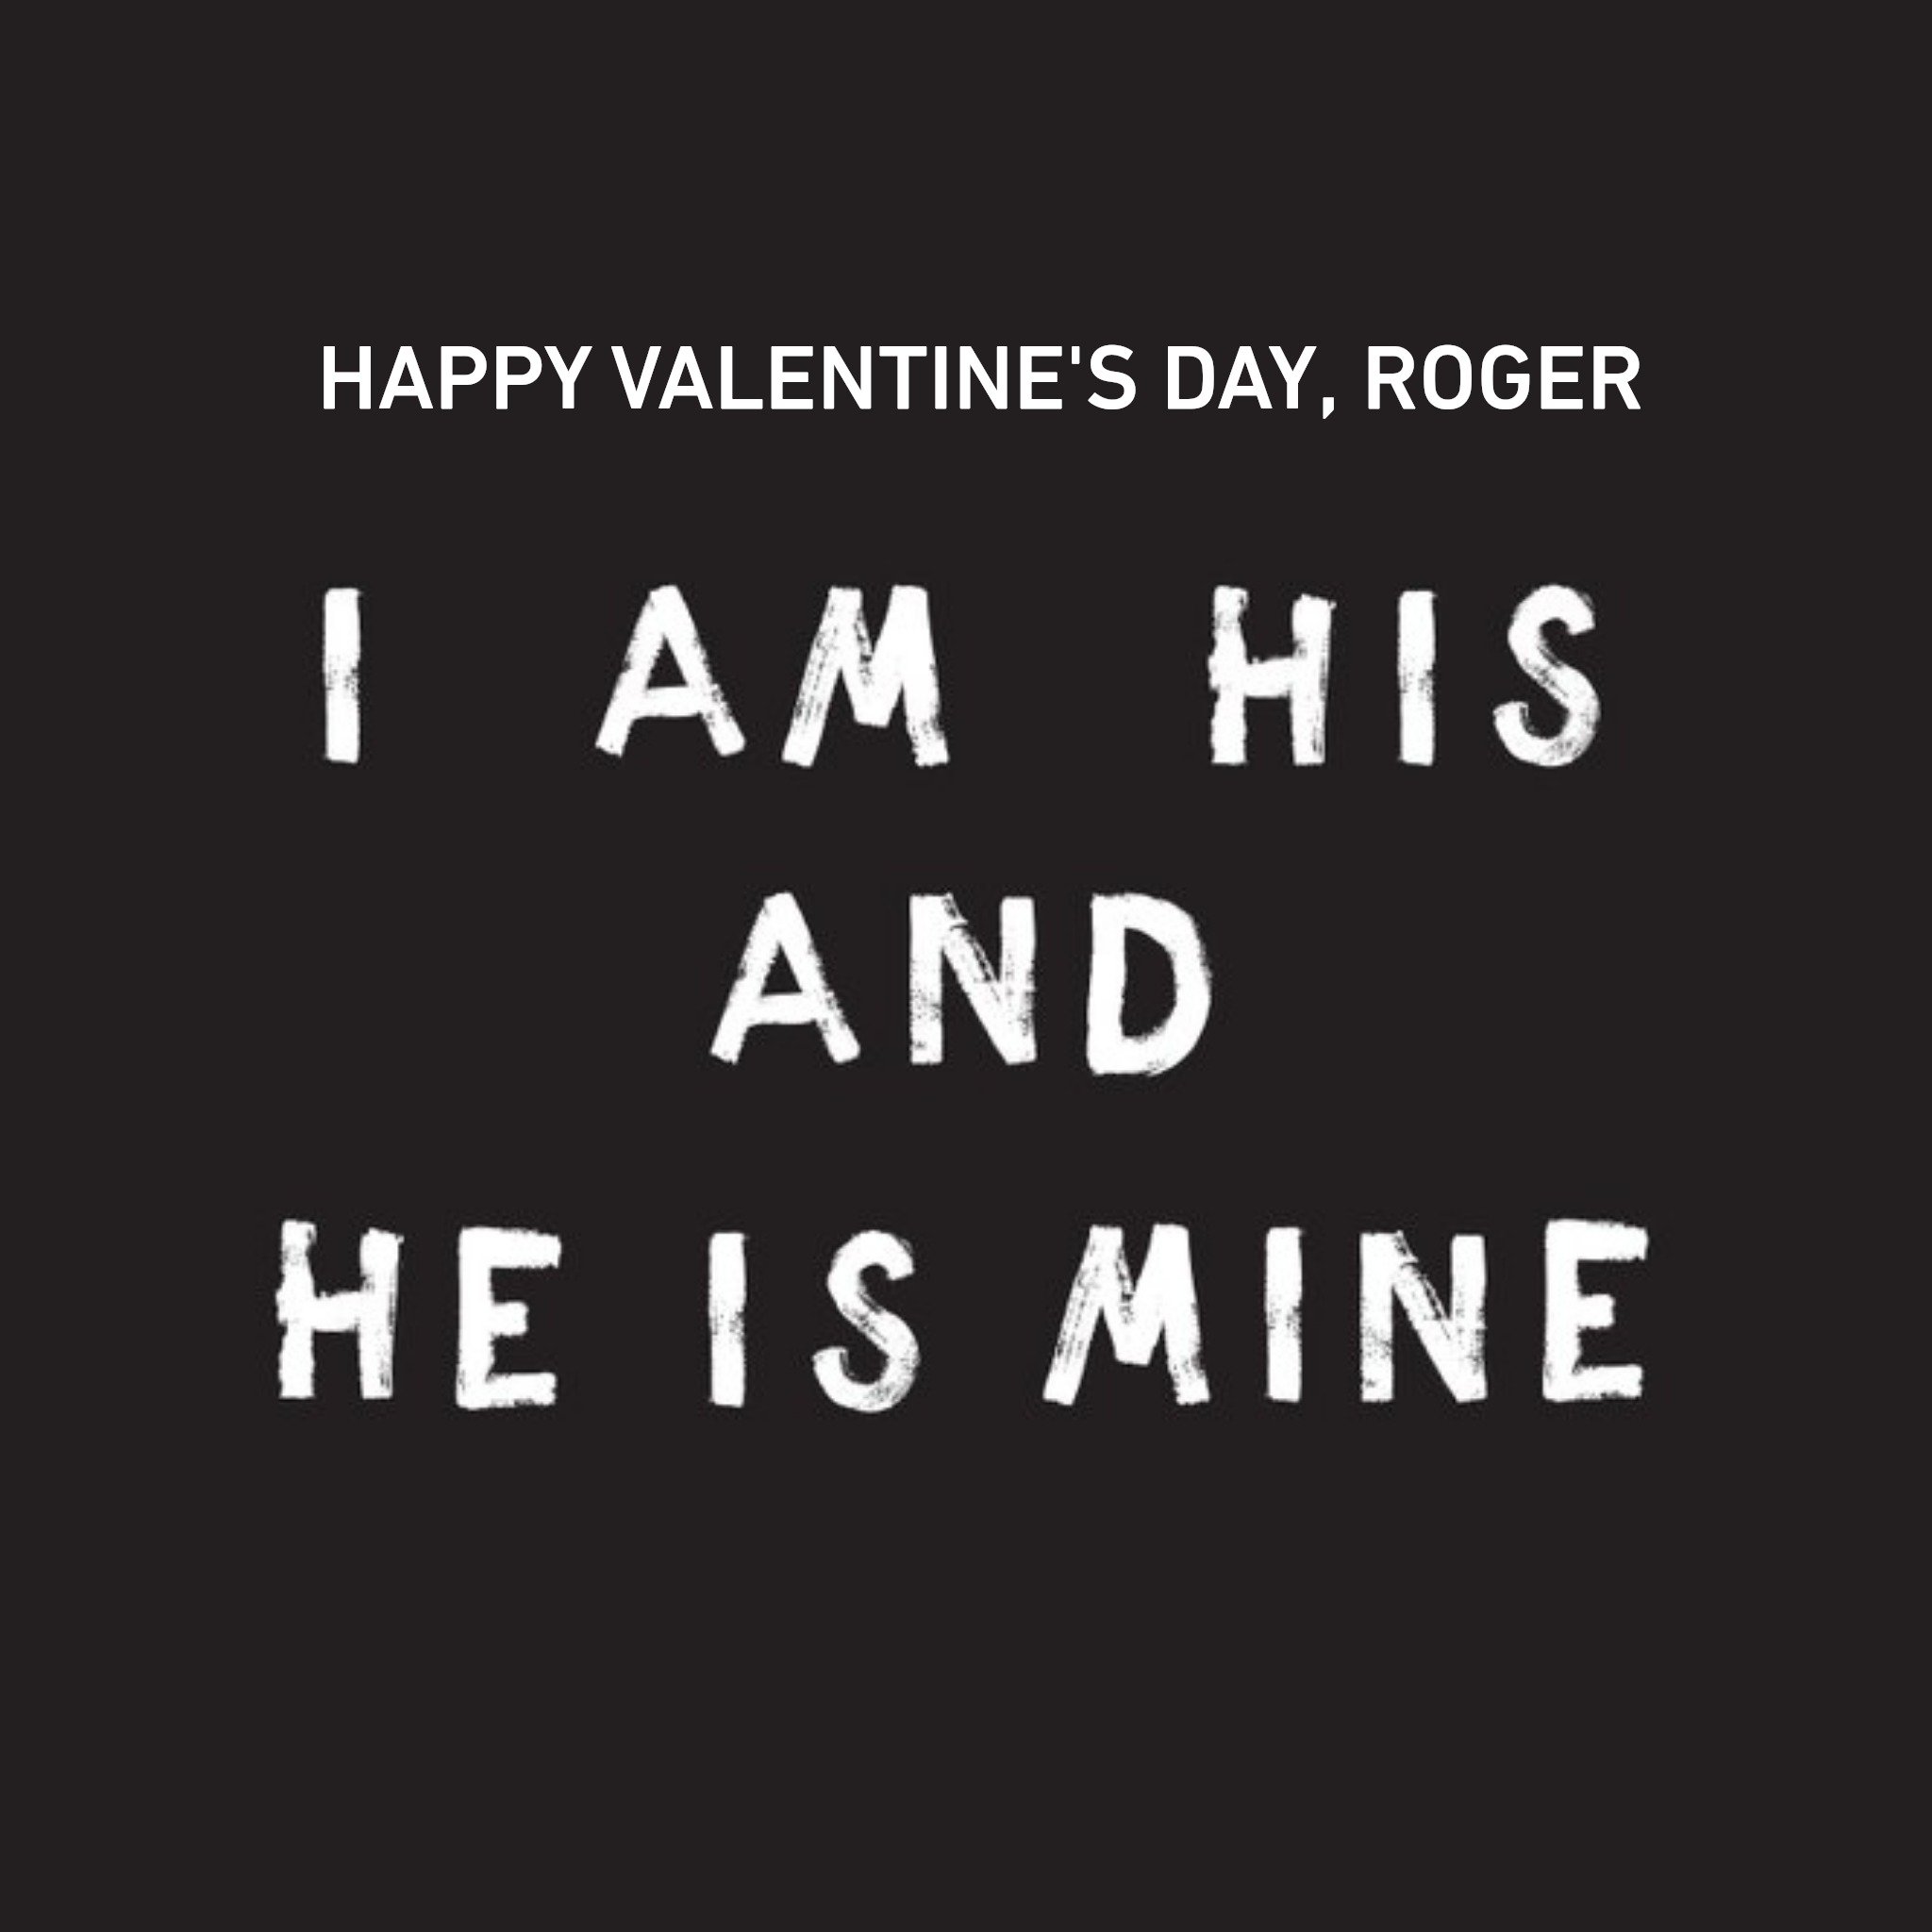 Moonpig Modern Design Typographic Black And White I Am His And He Is Mine Gay Happy Valentines Day C